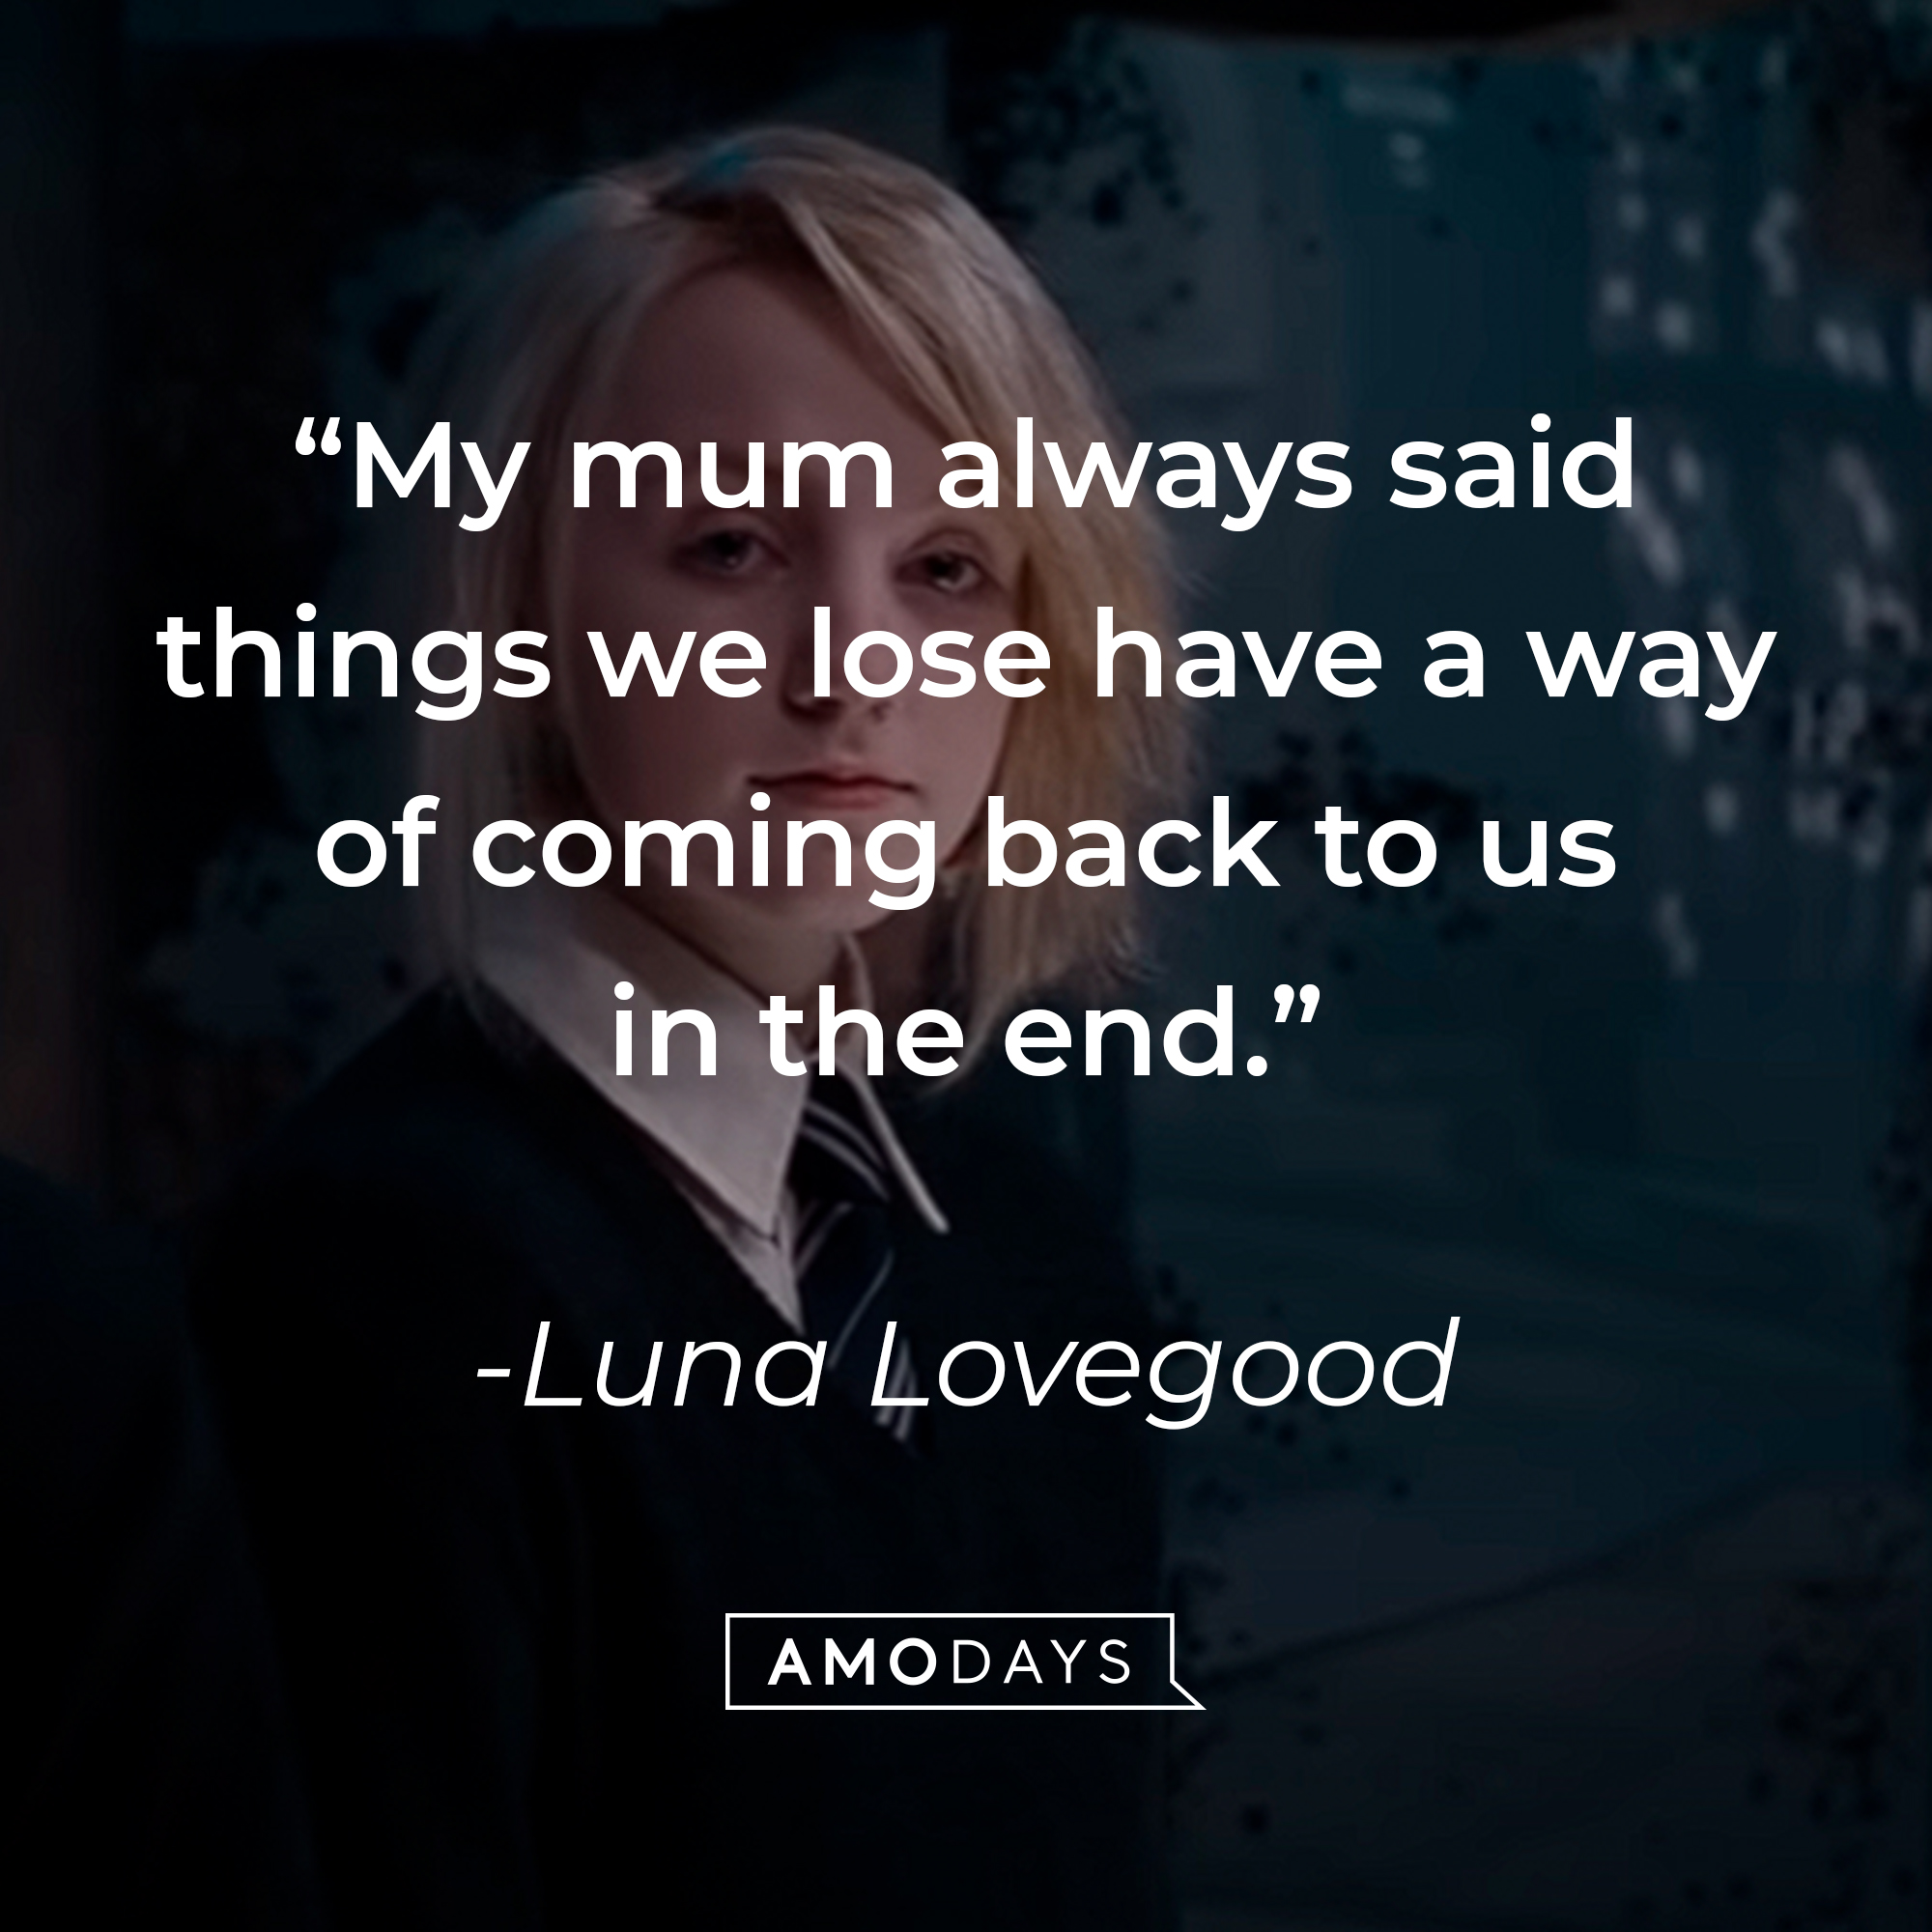 Luna Lovegood's quote: “My mum always said things we lose have a way of coming back to us in the end.” Source: youtube.com/harrypotter